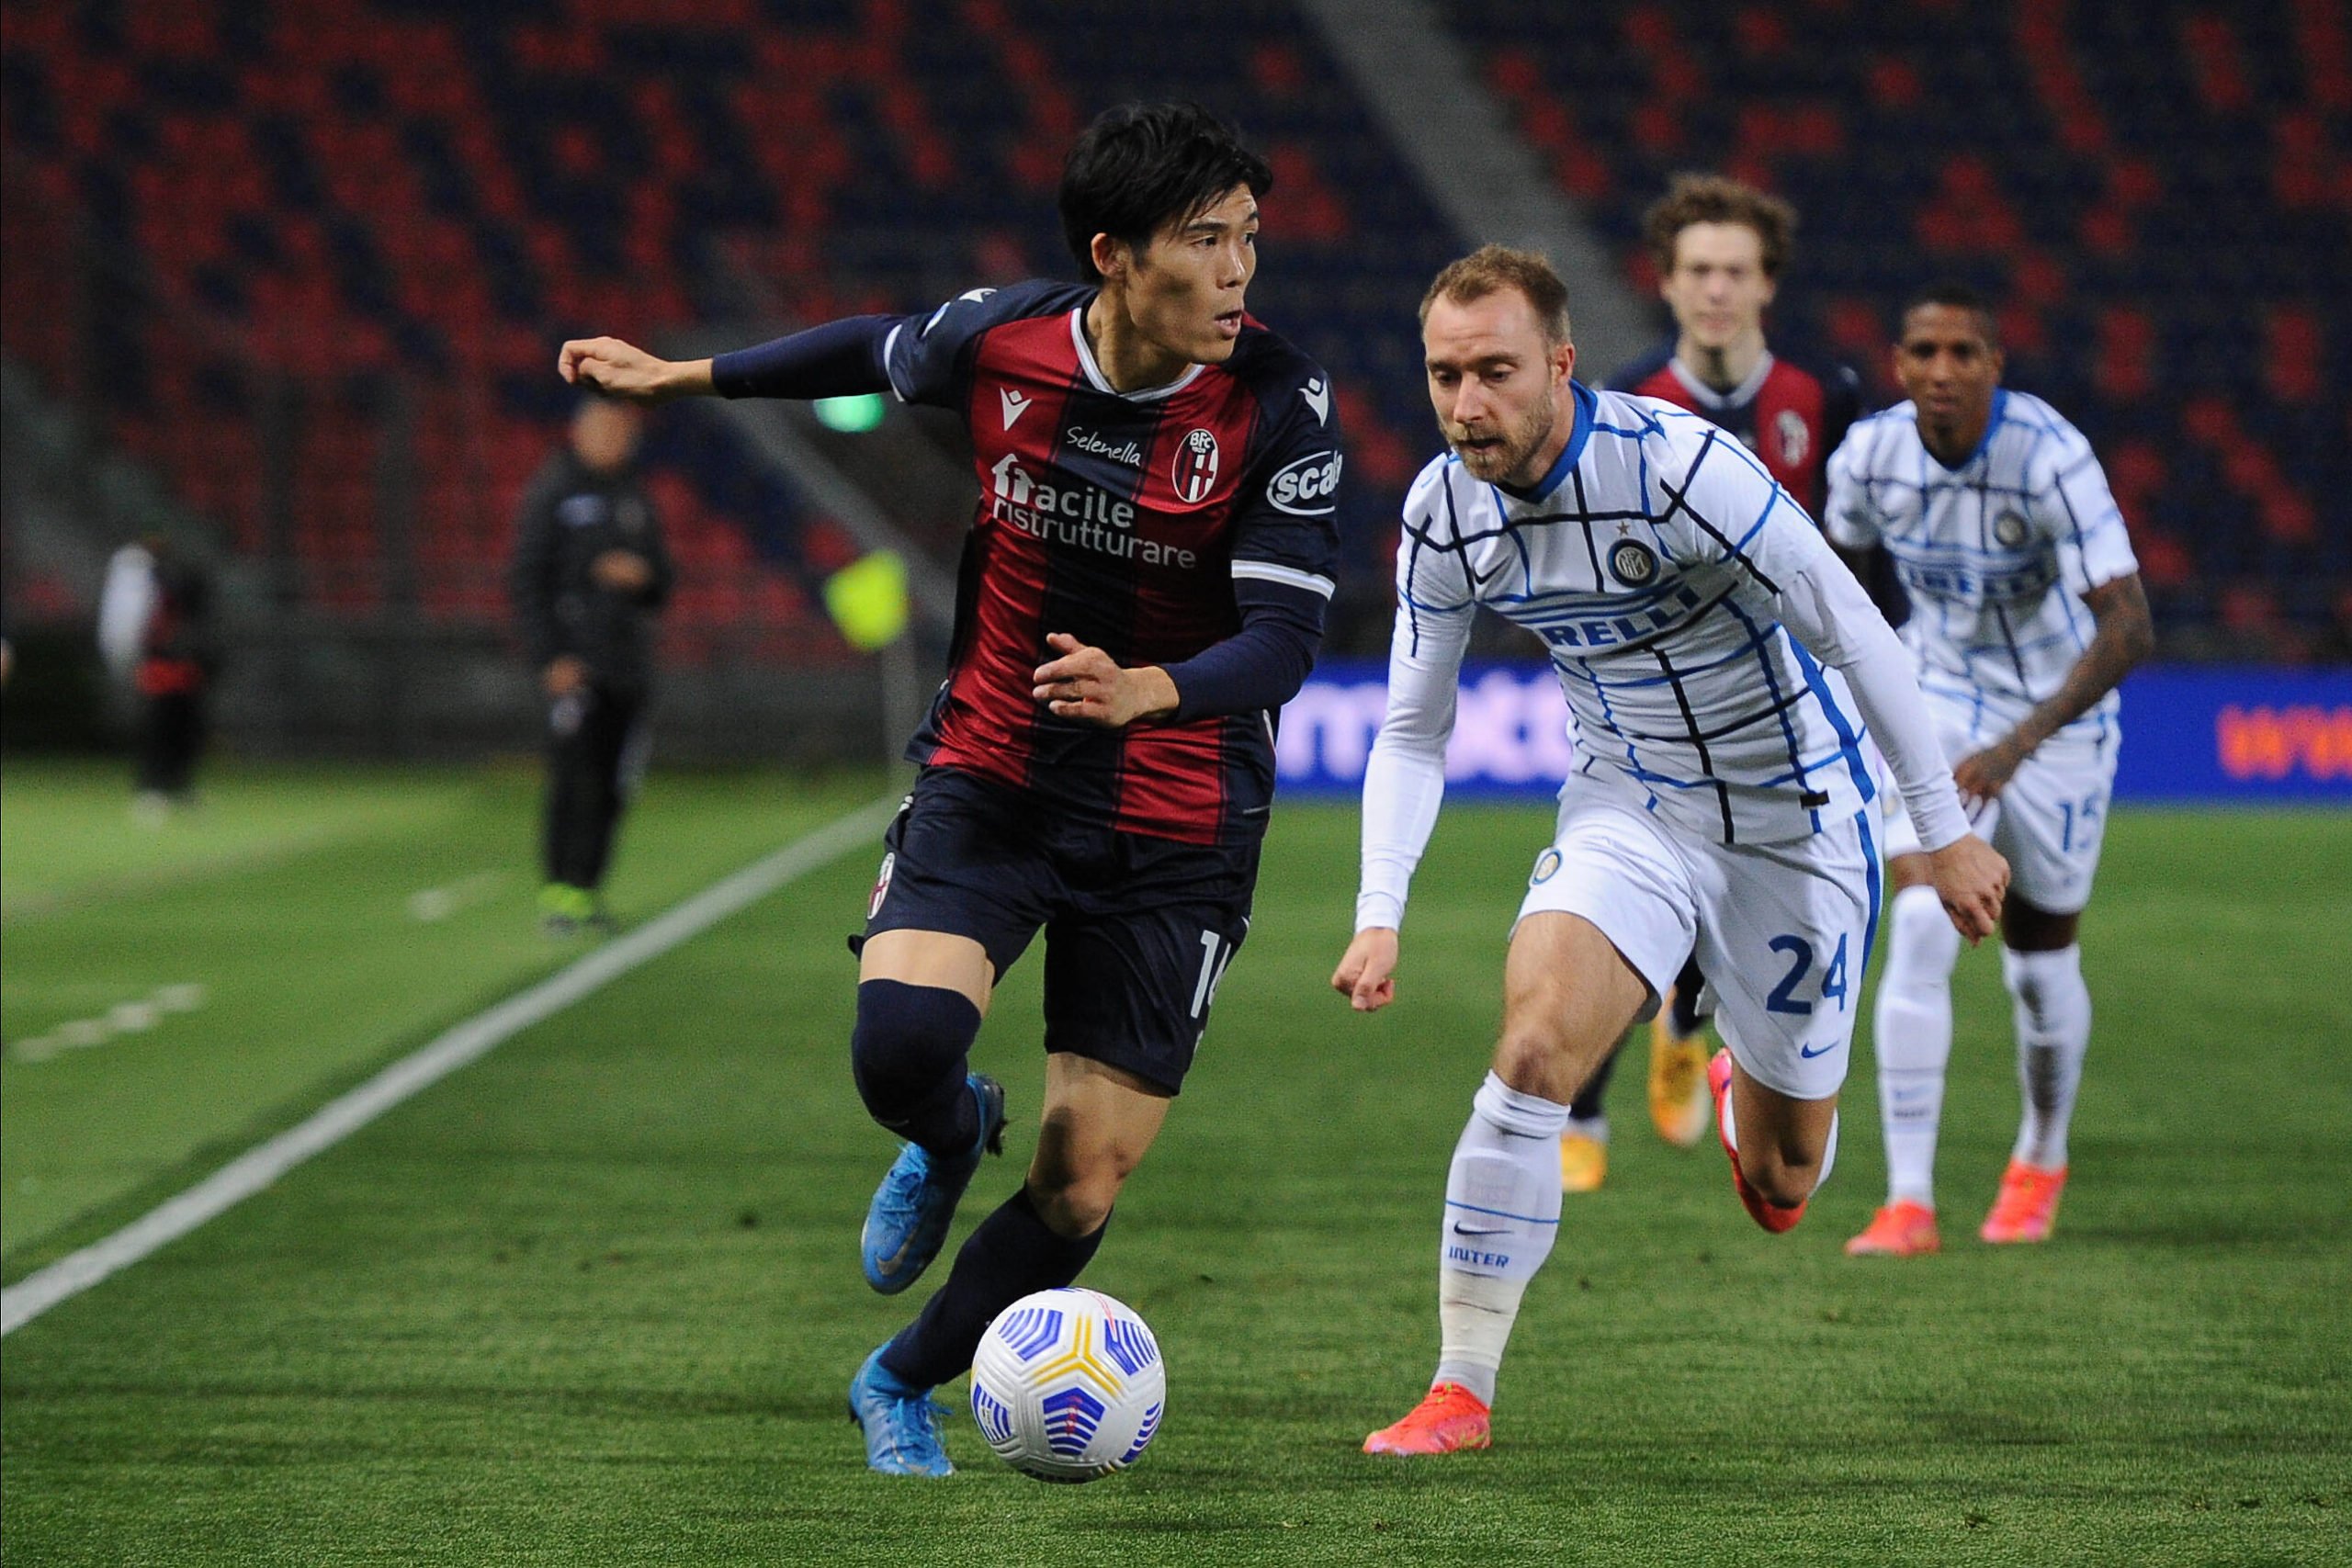 West Ham United eyeing a move for Tomiyasu who is seen in the picture